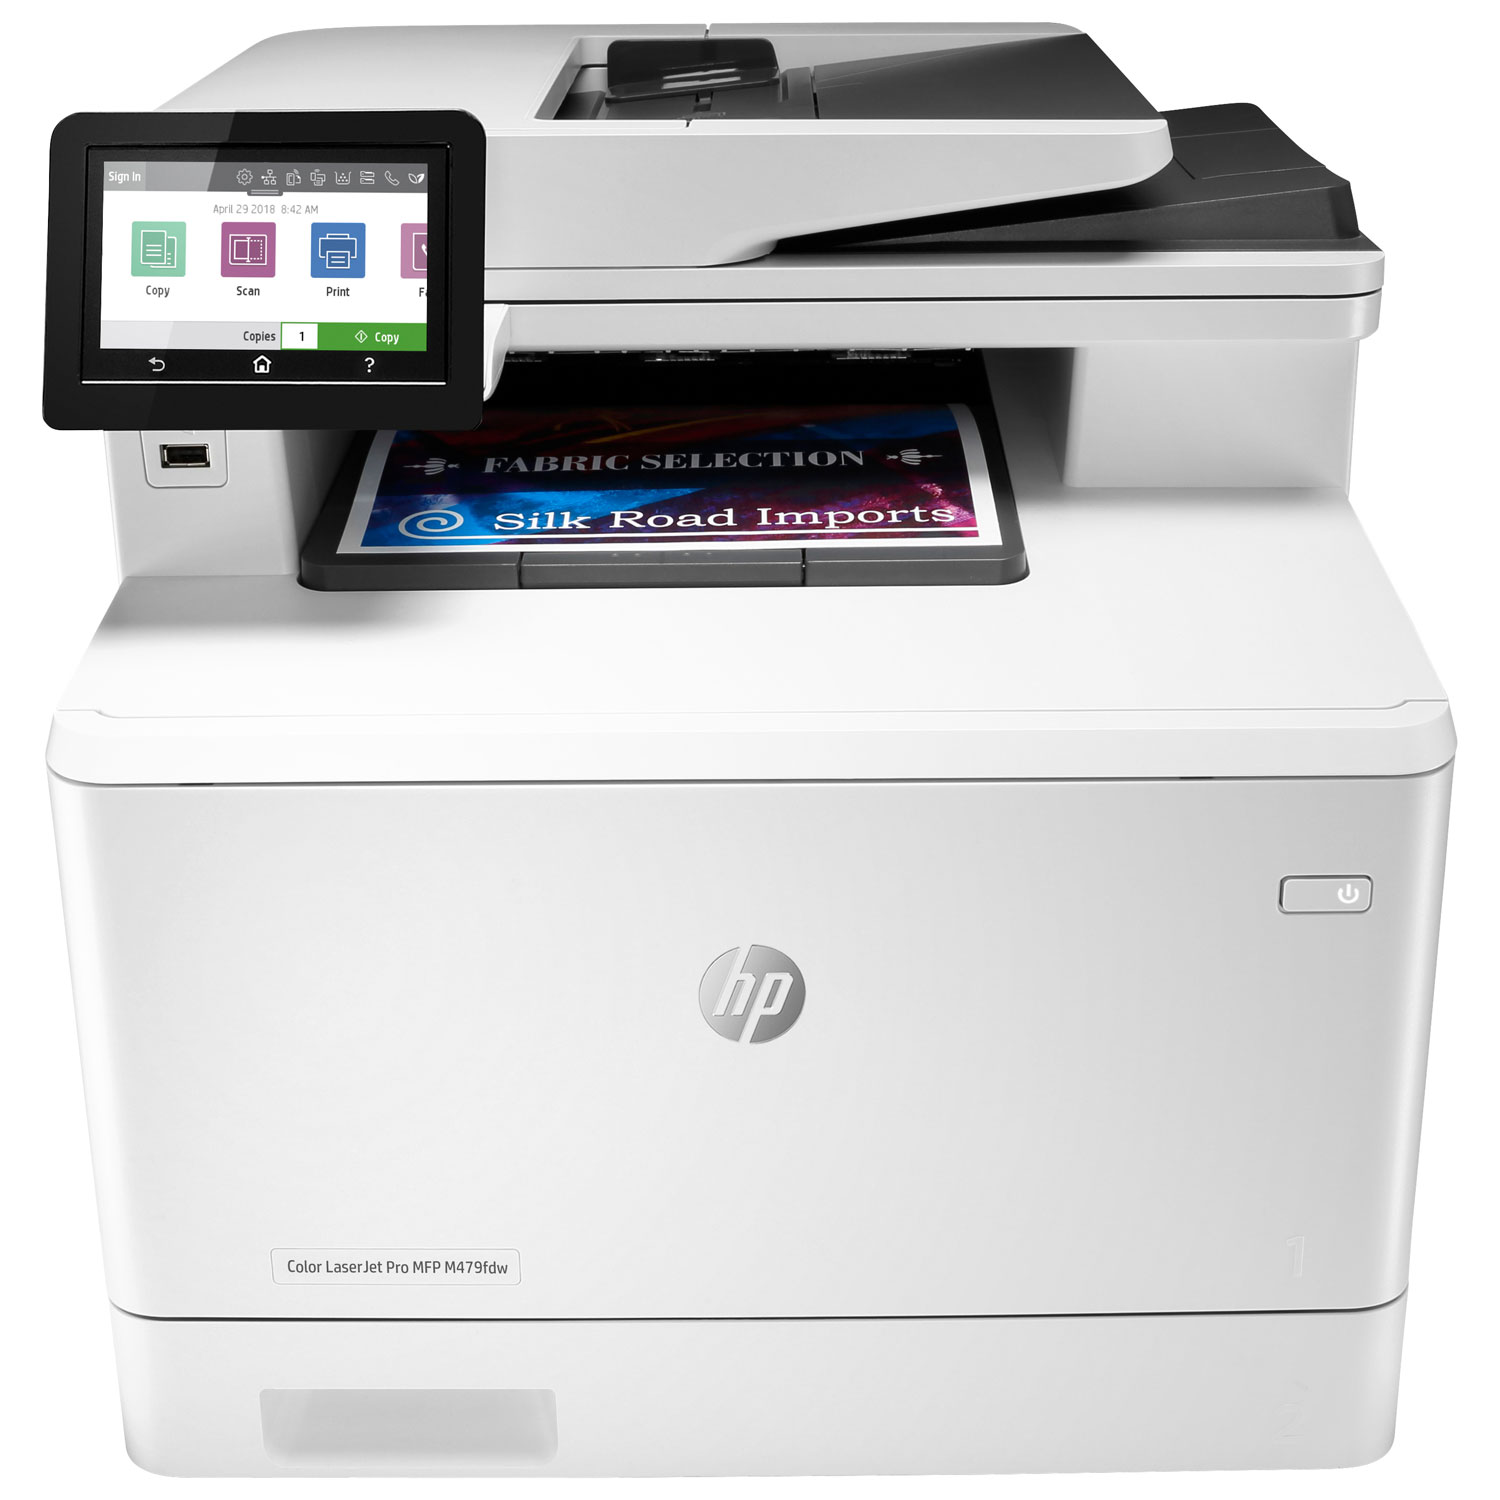 HP LaserJet Pro Colour Wireless All-In-One Printer (M479fdw) - Only at Best Buy